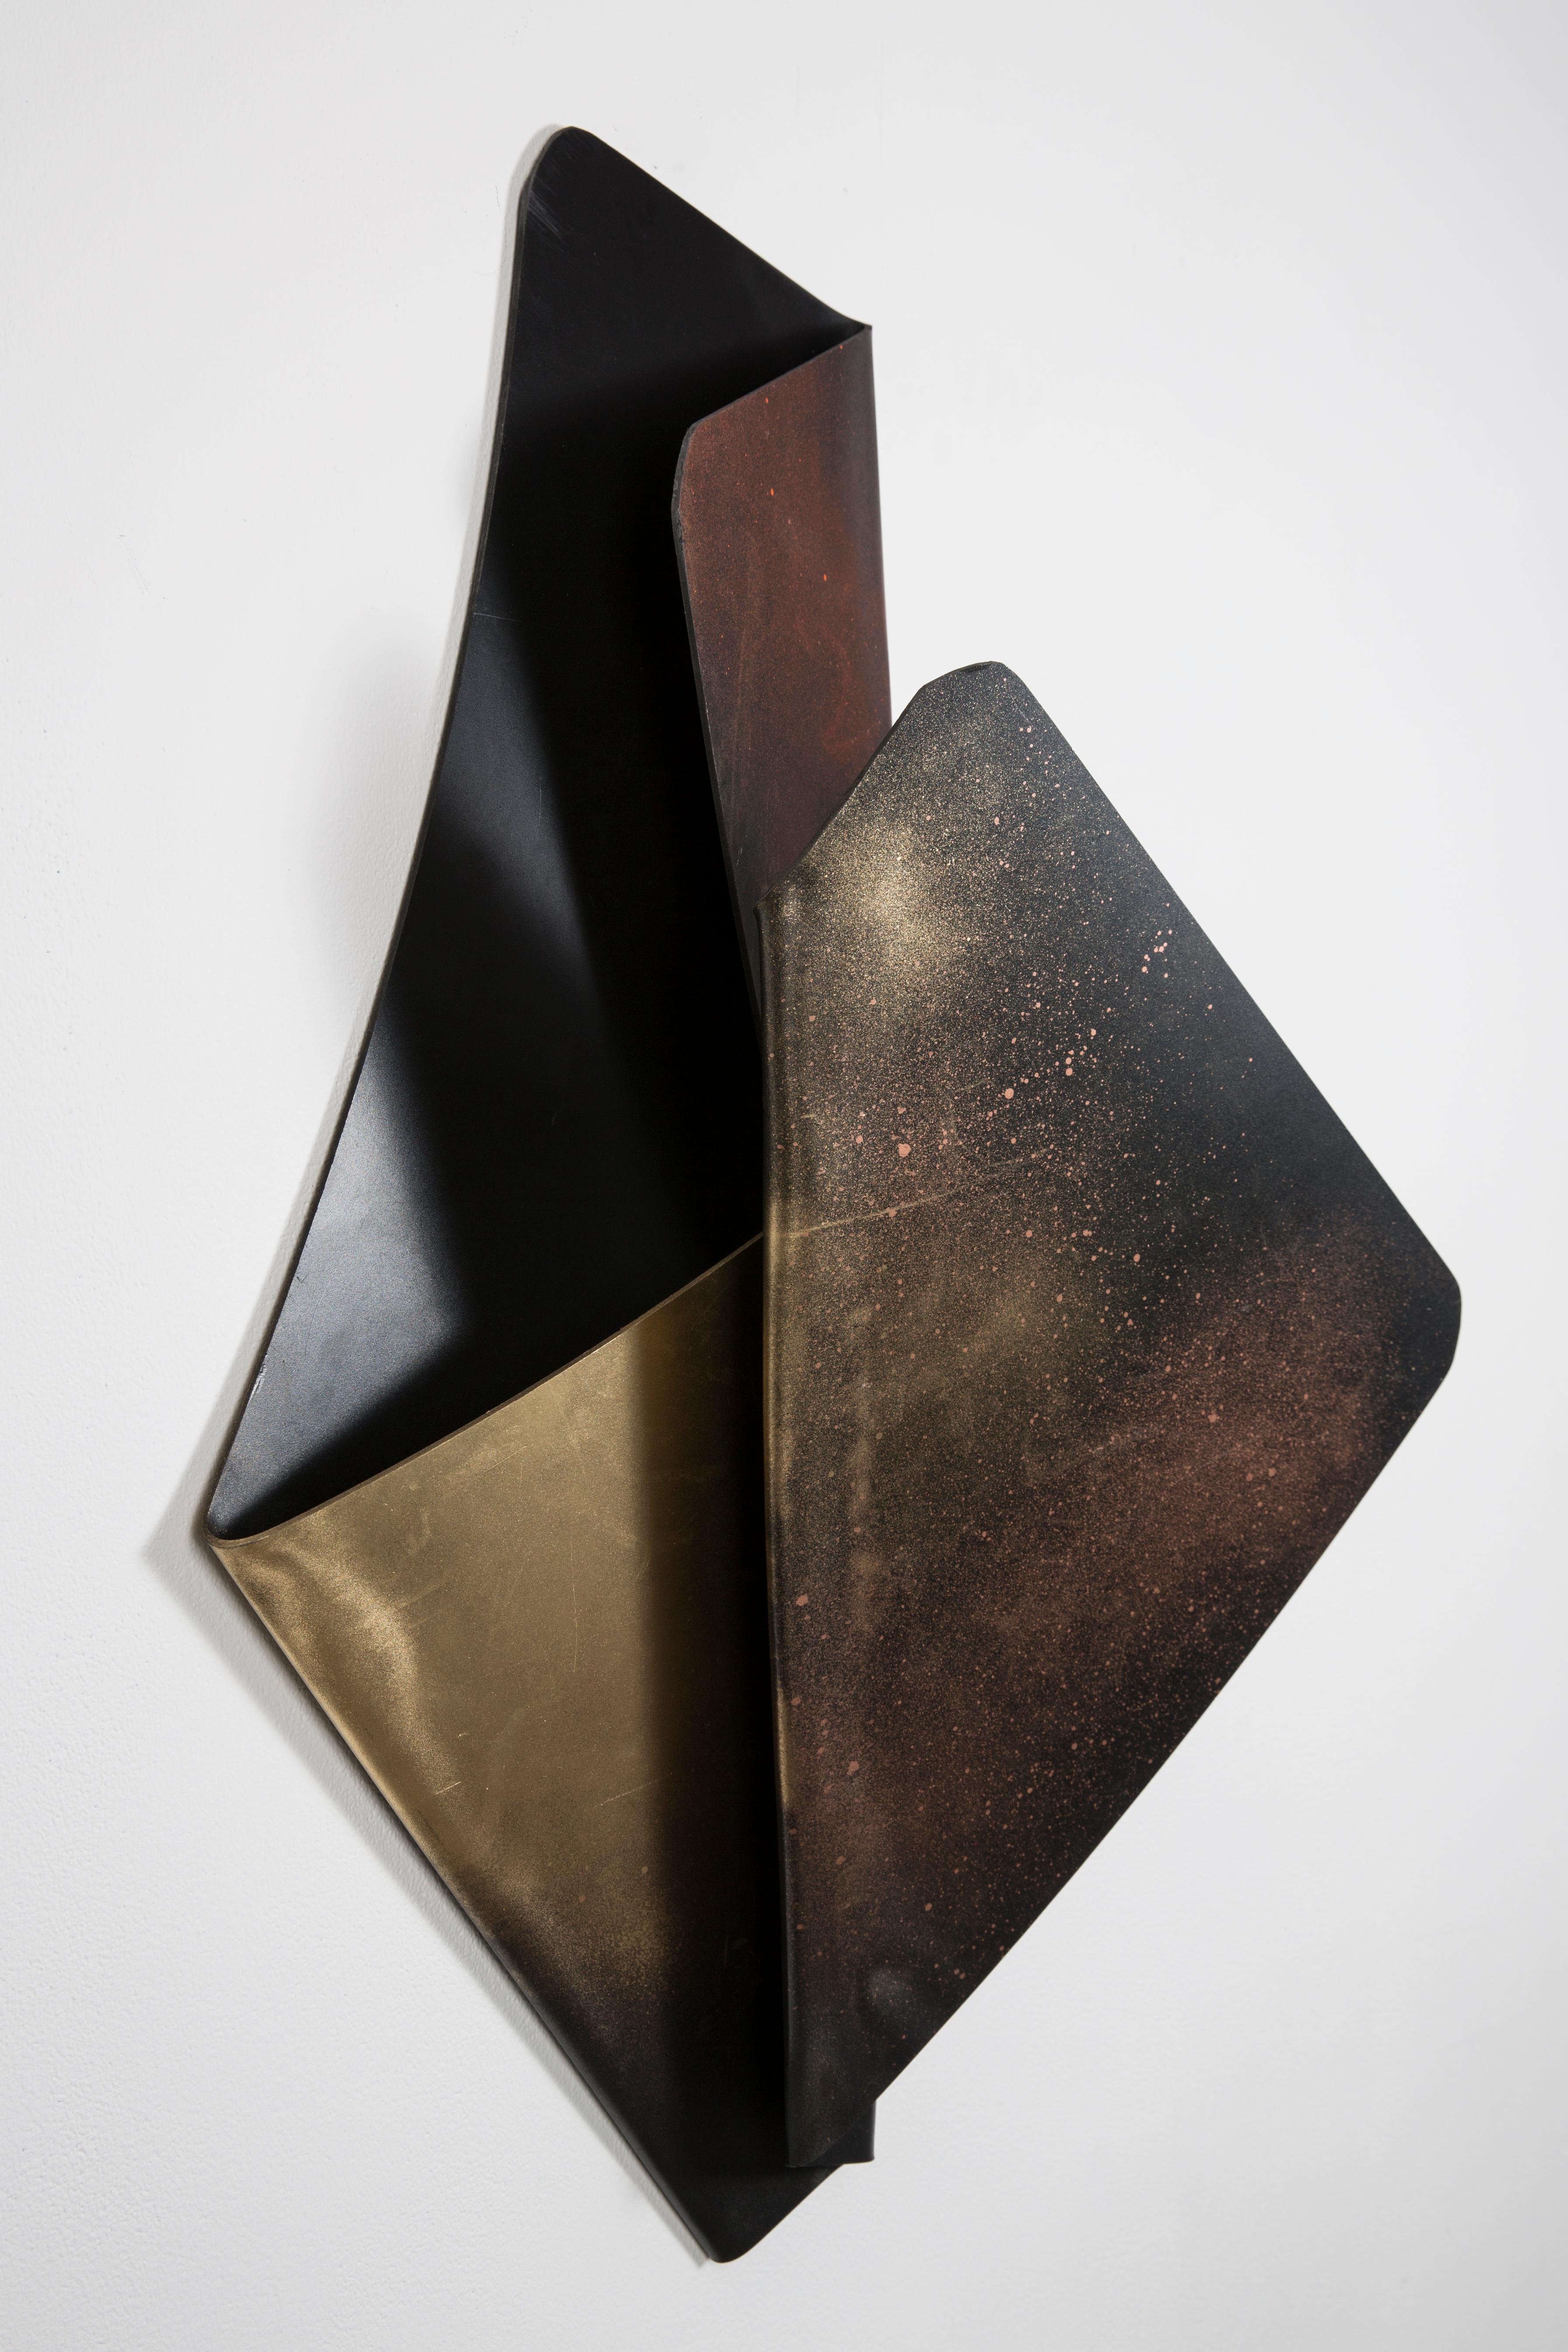 Vuelve A Anochecer - Acrylic Polymer Wall Hanging Sculpture, Black and Gold - Gray Abstract Sculpture by Andrès Bustamante